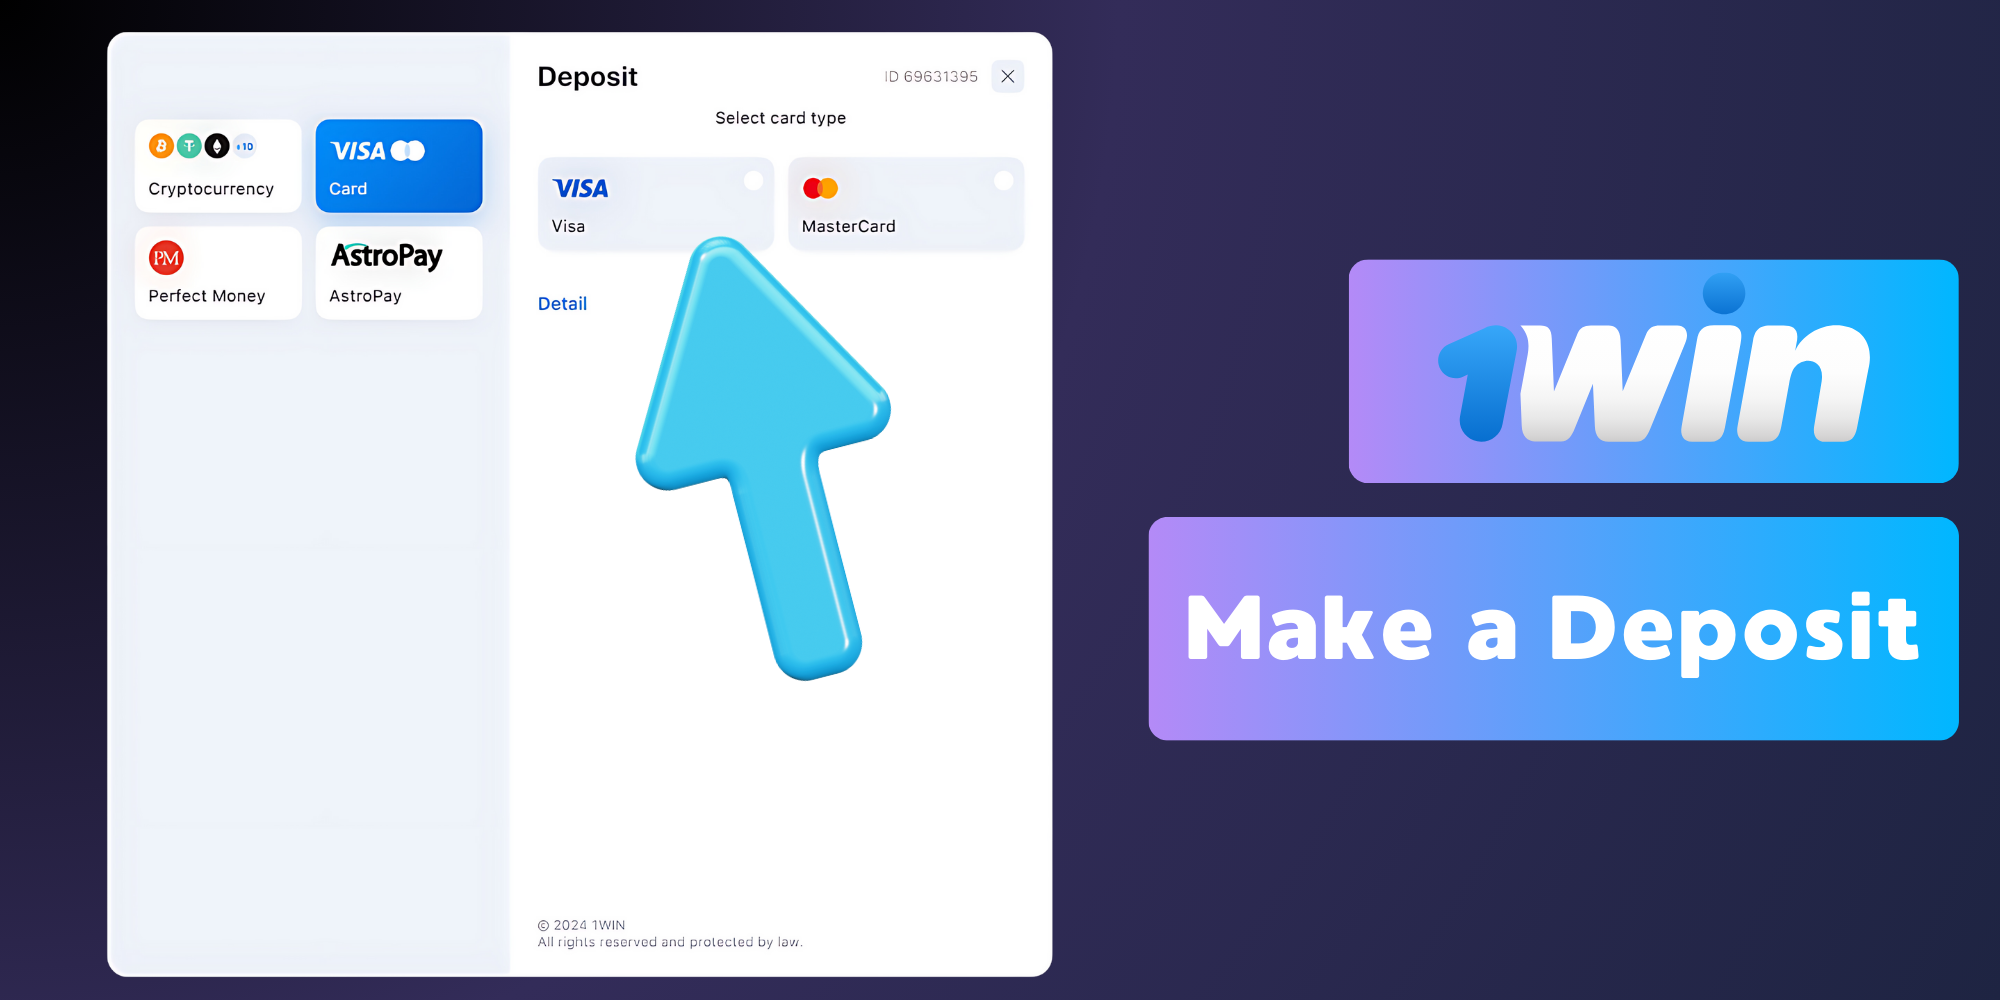 Make a Deposit to Your Account